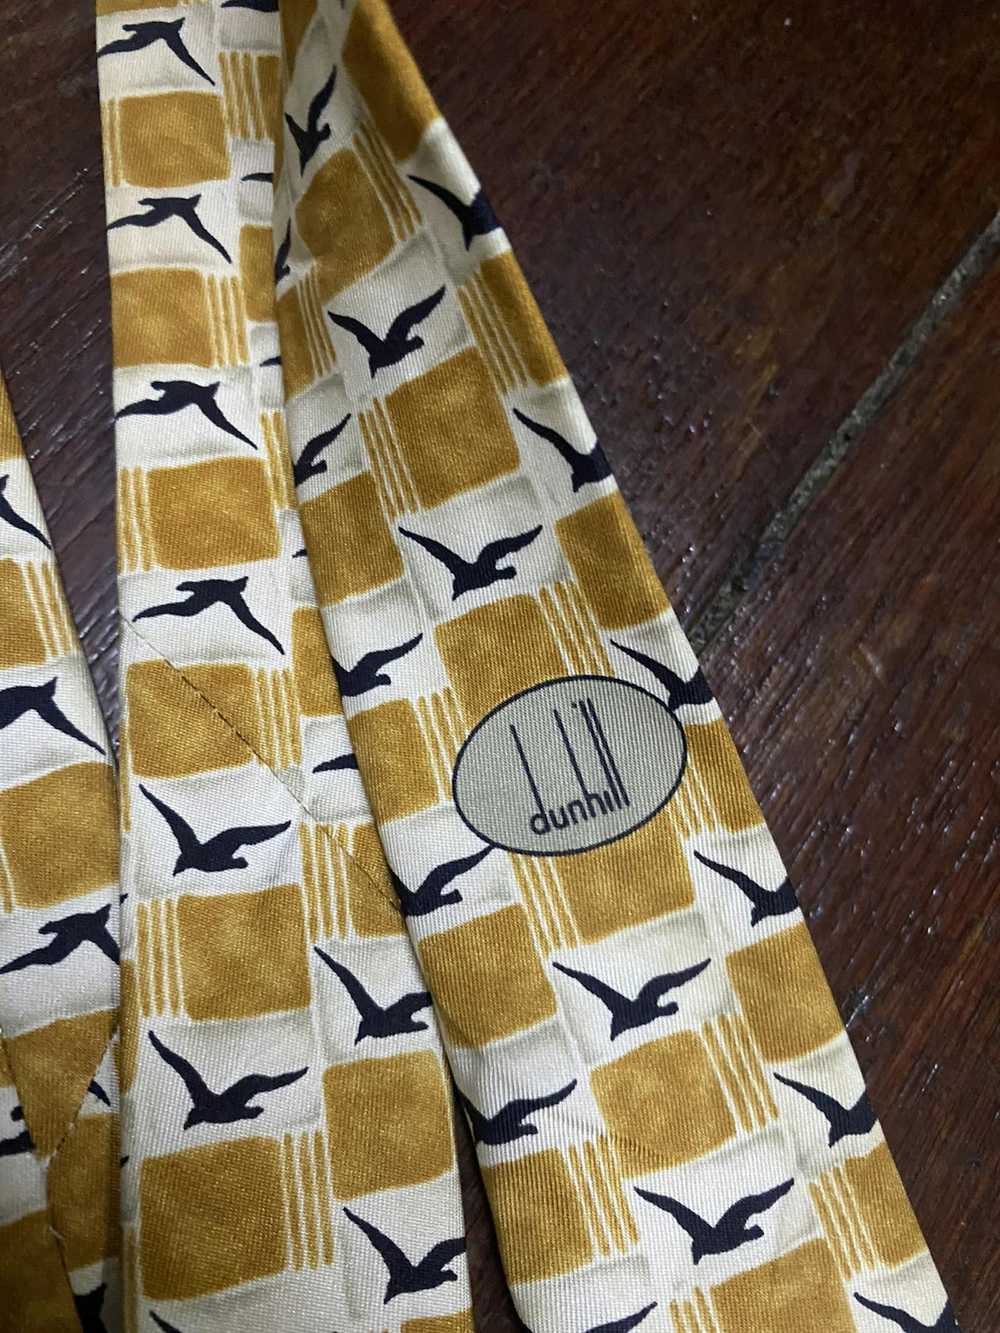 Other × Vintage Vintage dunhill full print ties - image 4